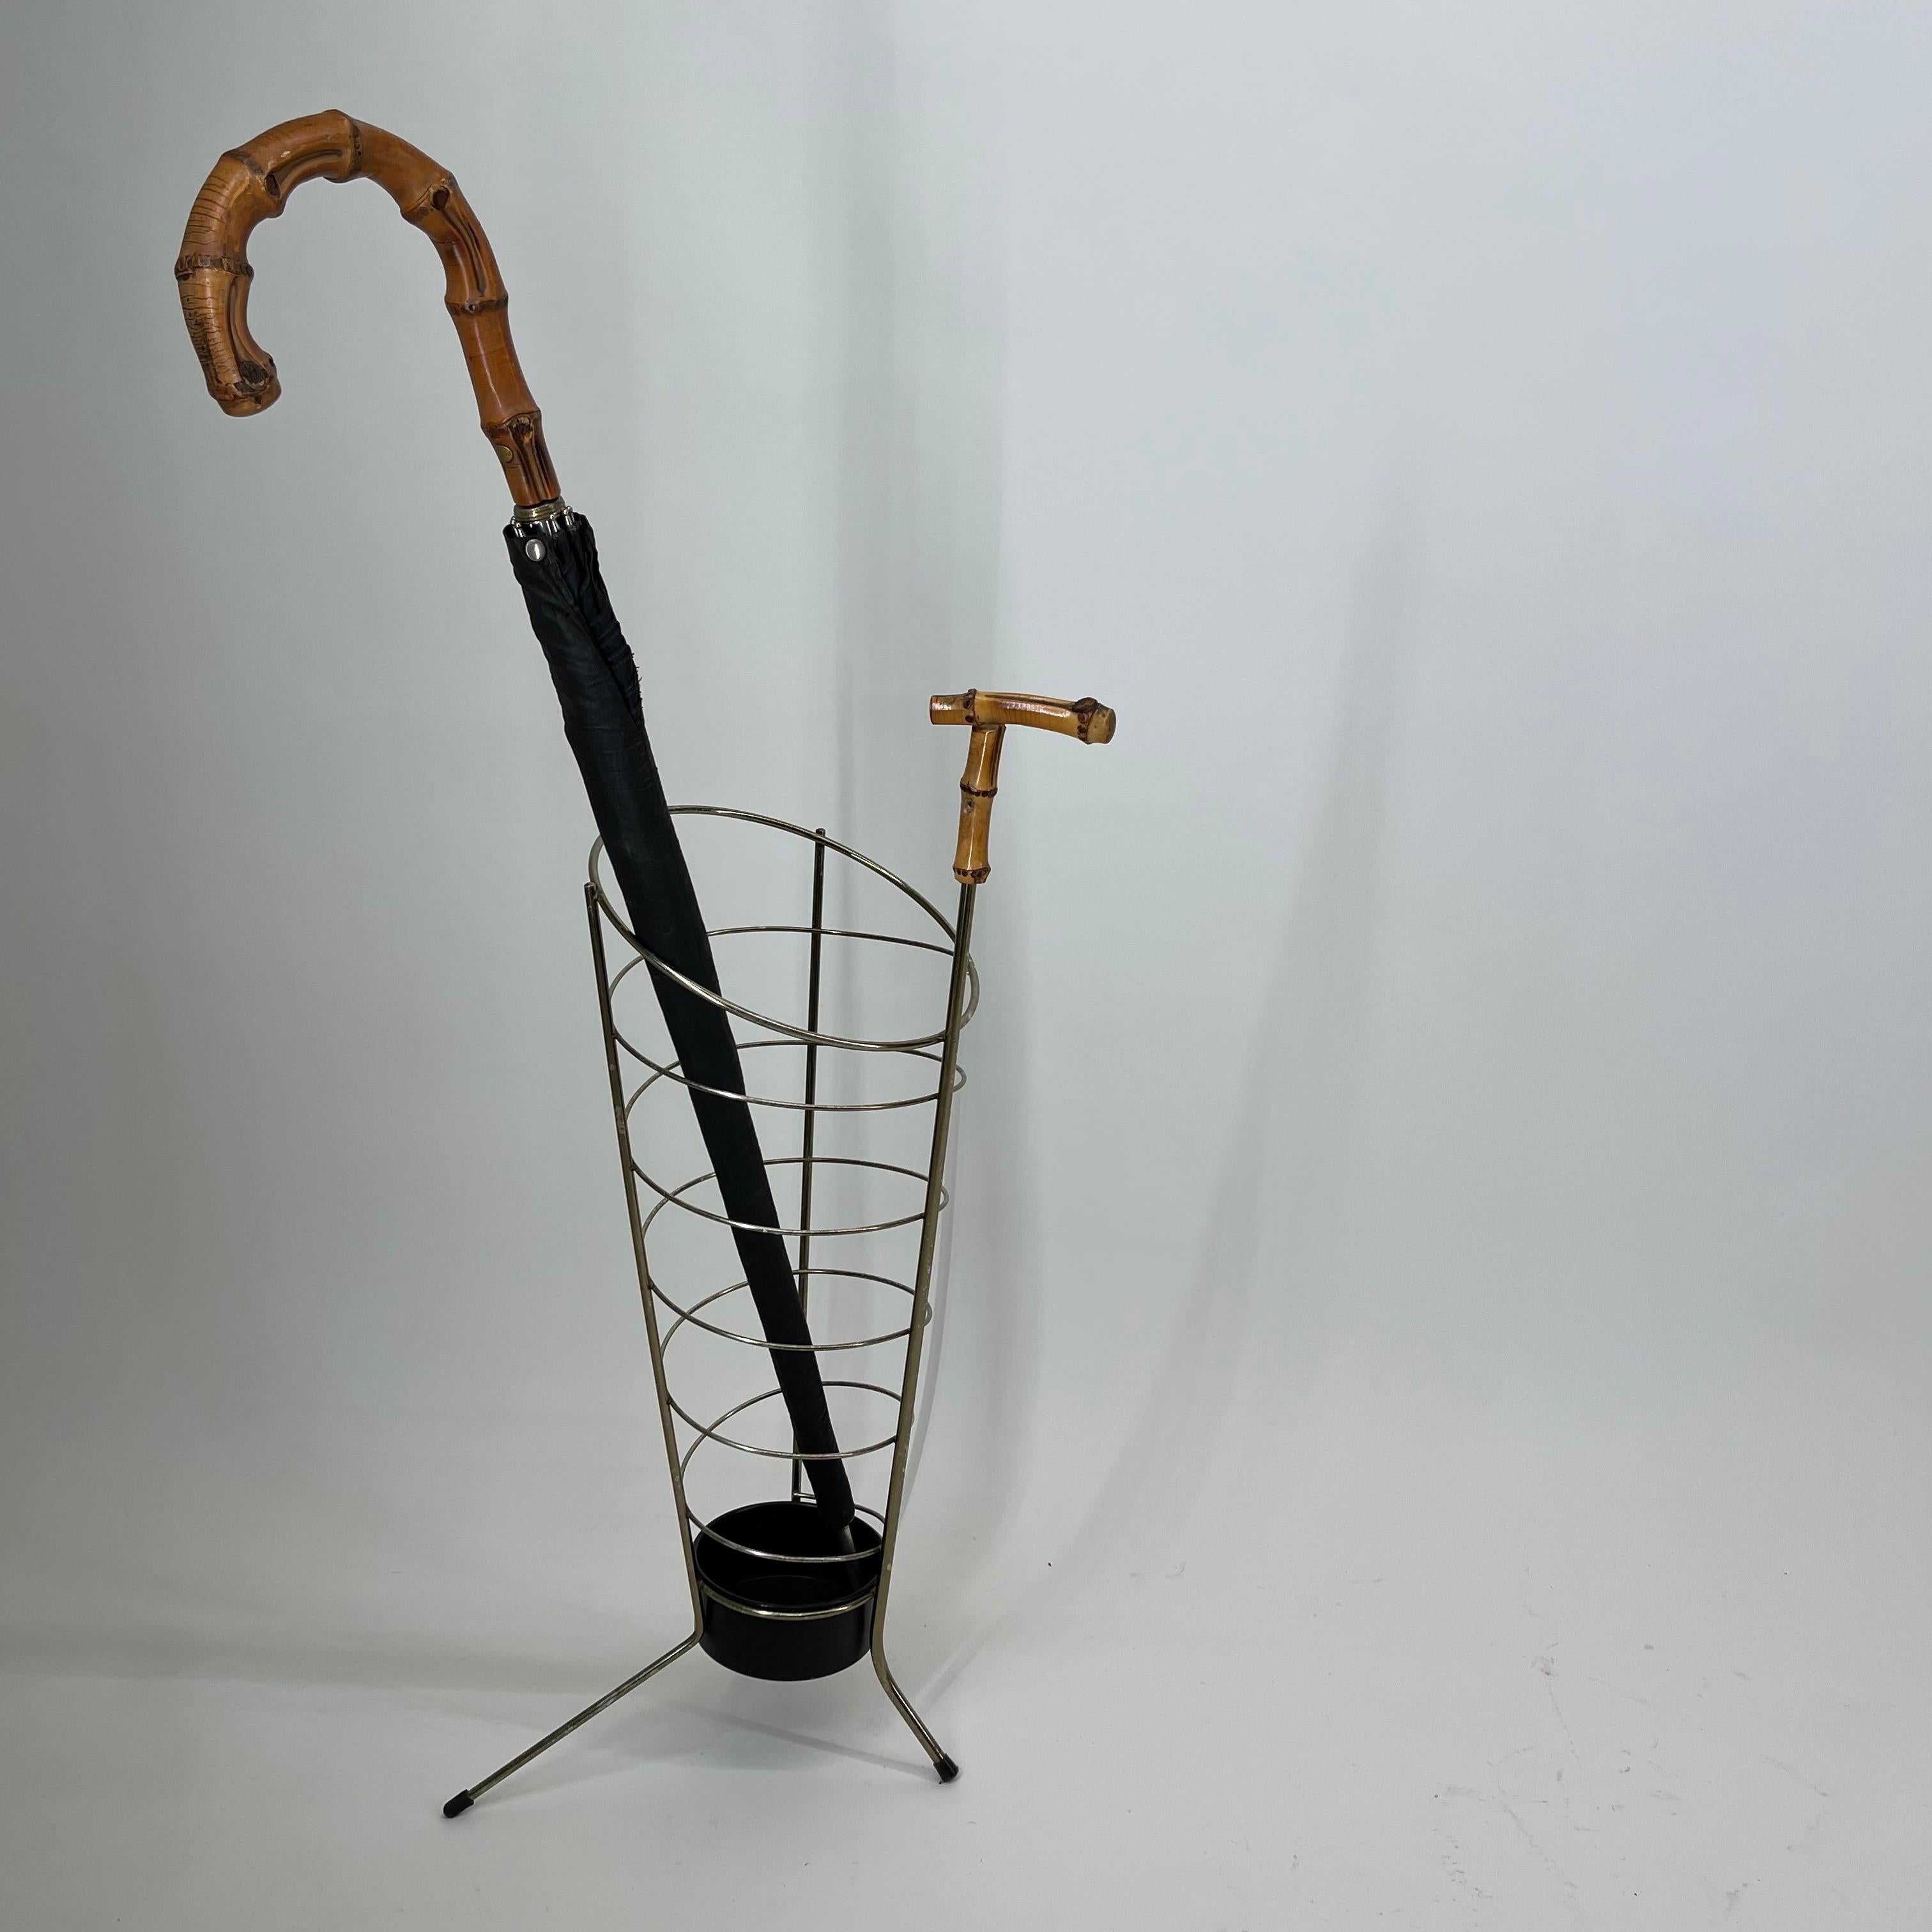 Italian Modernist Umbrella Stand Brass Style Bamboo Handle, 1950s For Sale 3